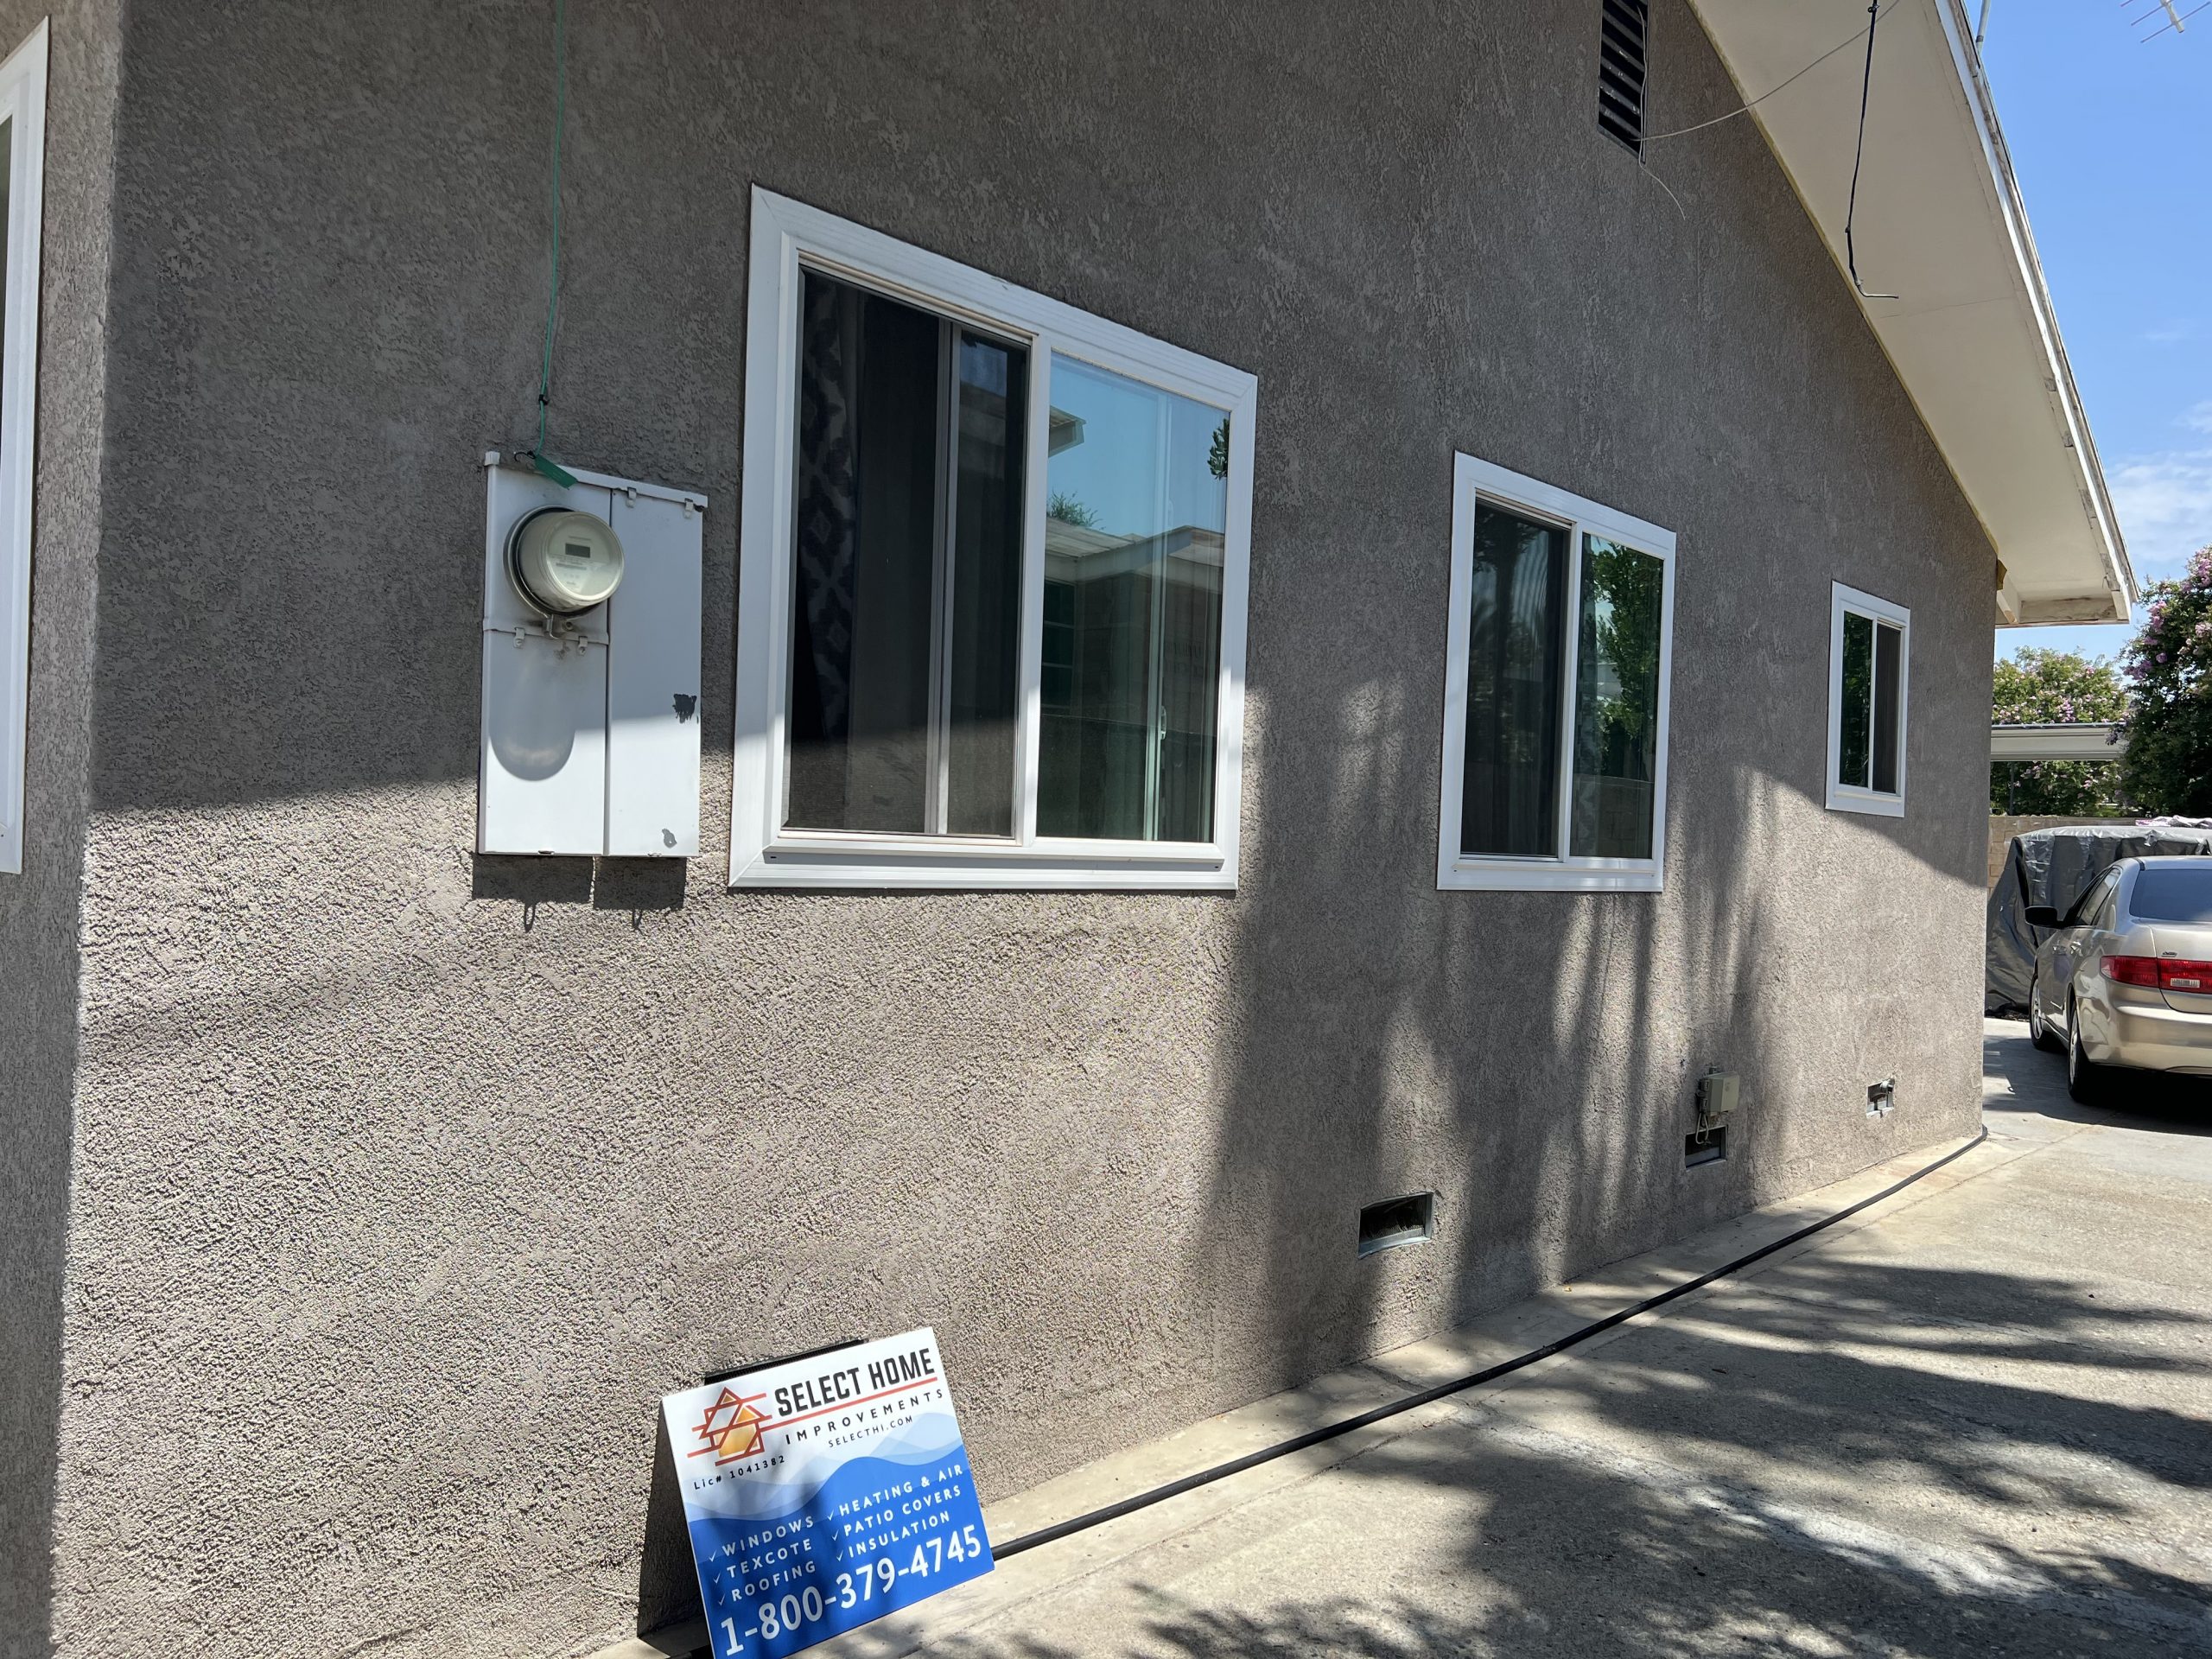 Window replacement Project in Riverside, CA